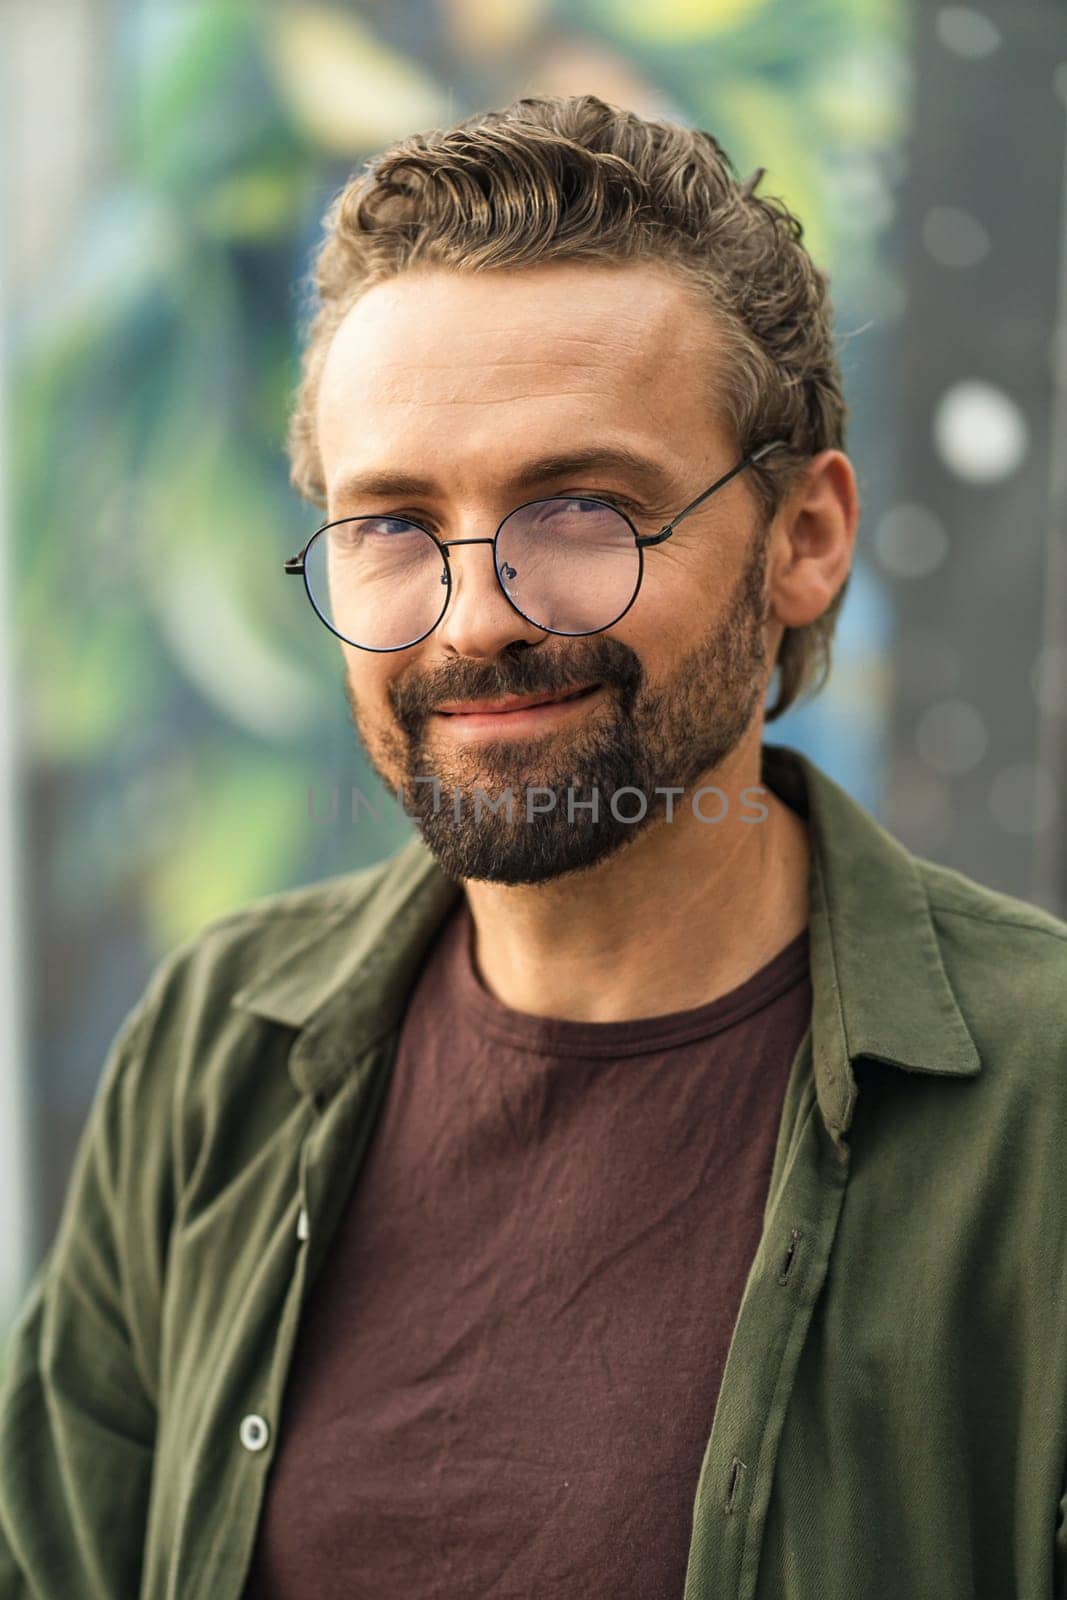 Handsome individual wearing glasses, situated outdoors against a graffiti-covered background. With a stylish and confident appearance, the subject exudes a modern and trendy vibe. by LipikStockMedia